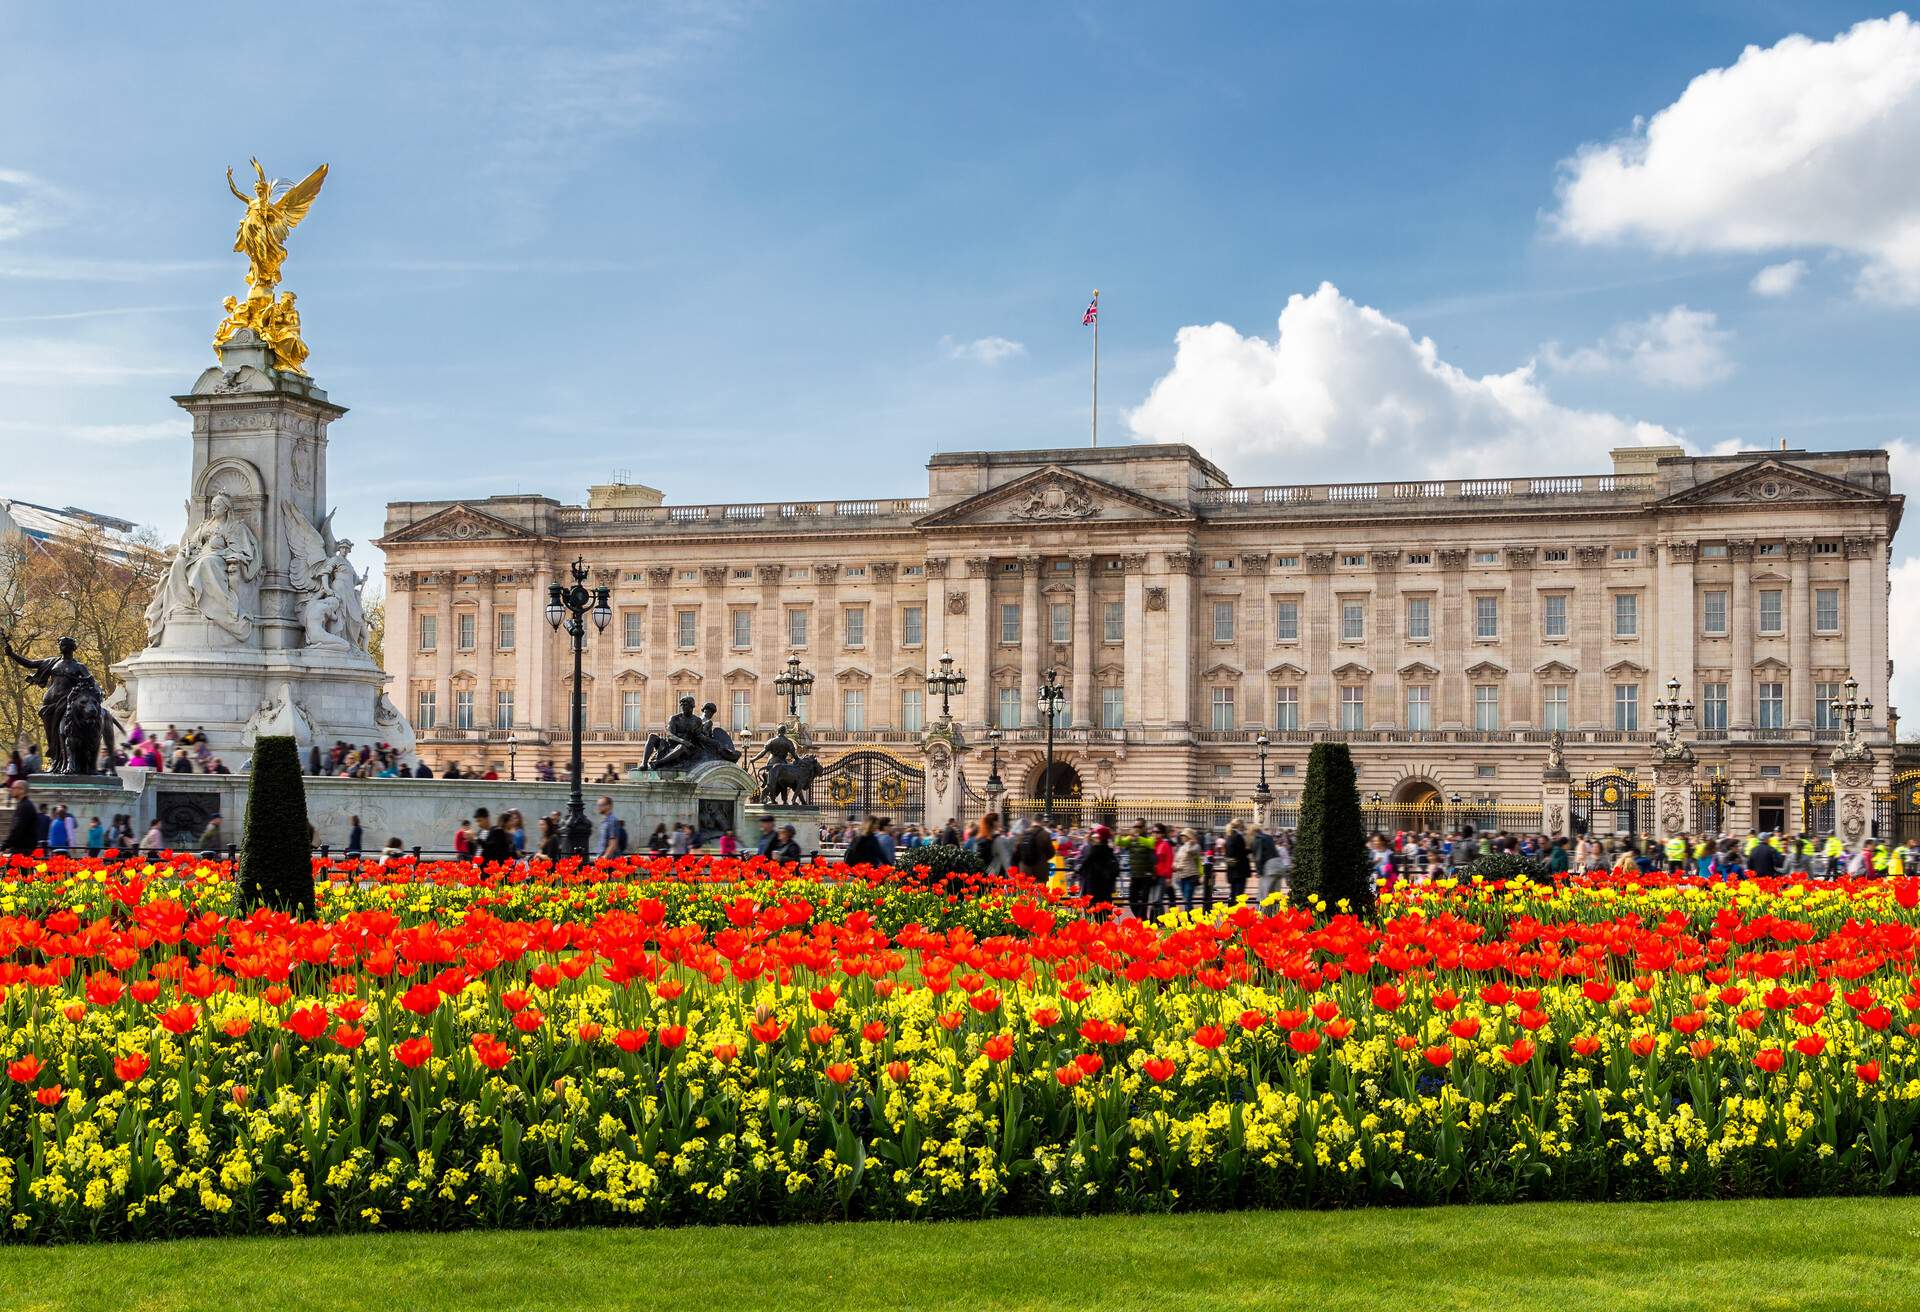 The crowd in front of Buckingham Palace and a lush garden with colourful blossoms.